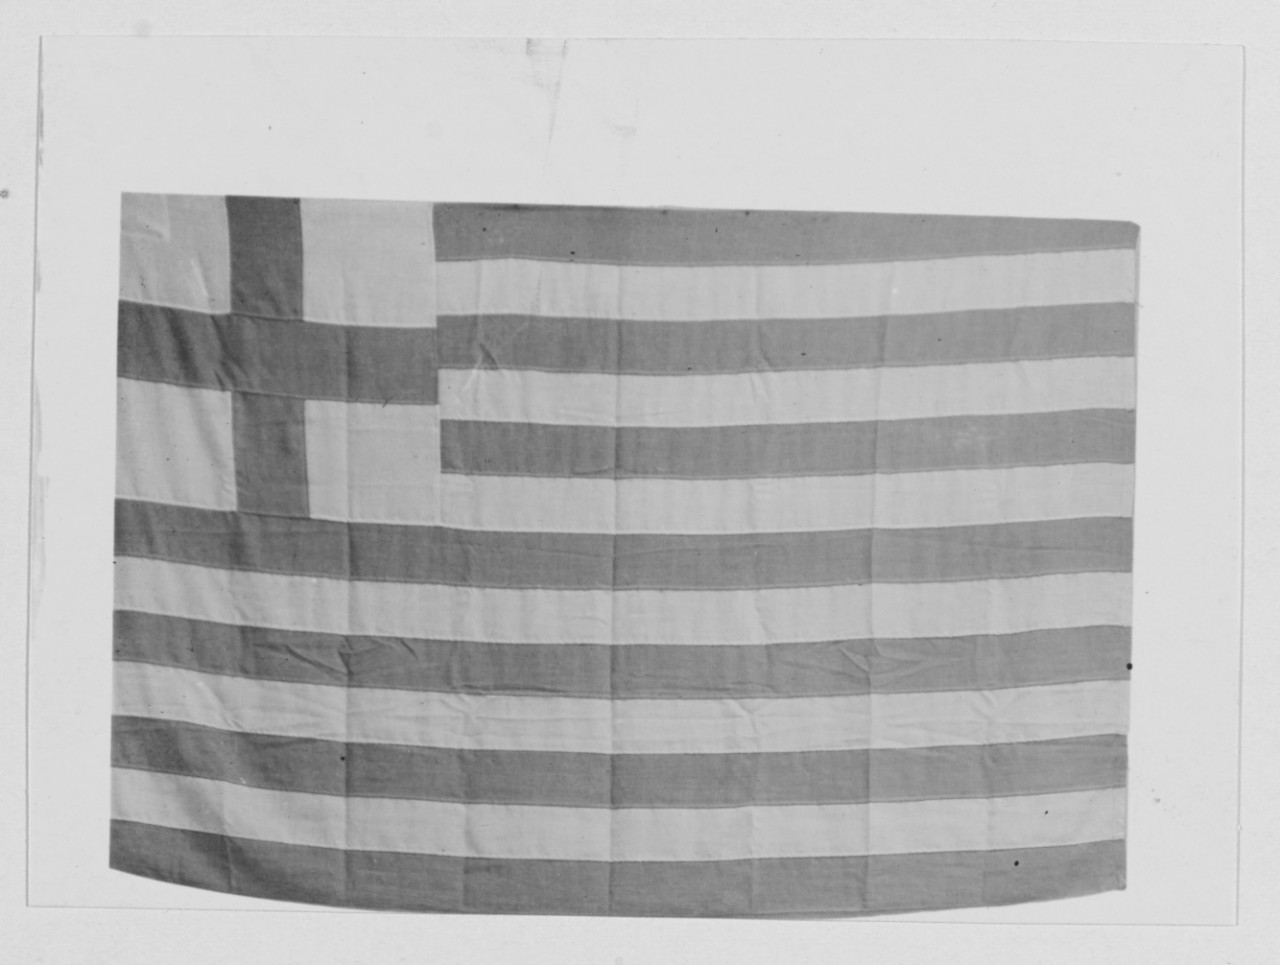 English East India Co. Ensign 1704.